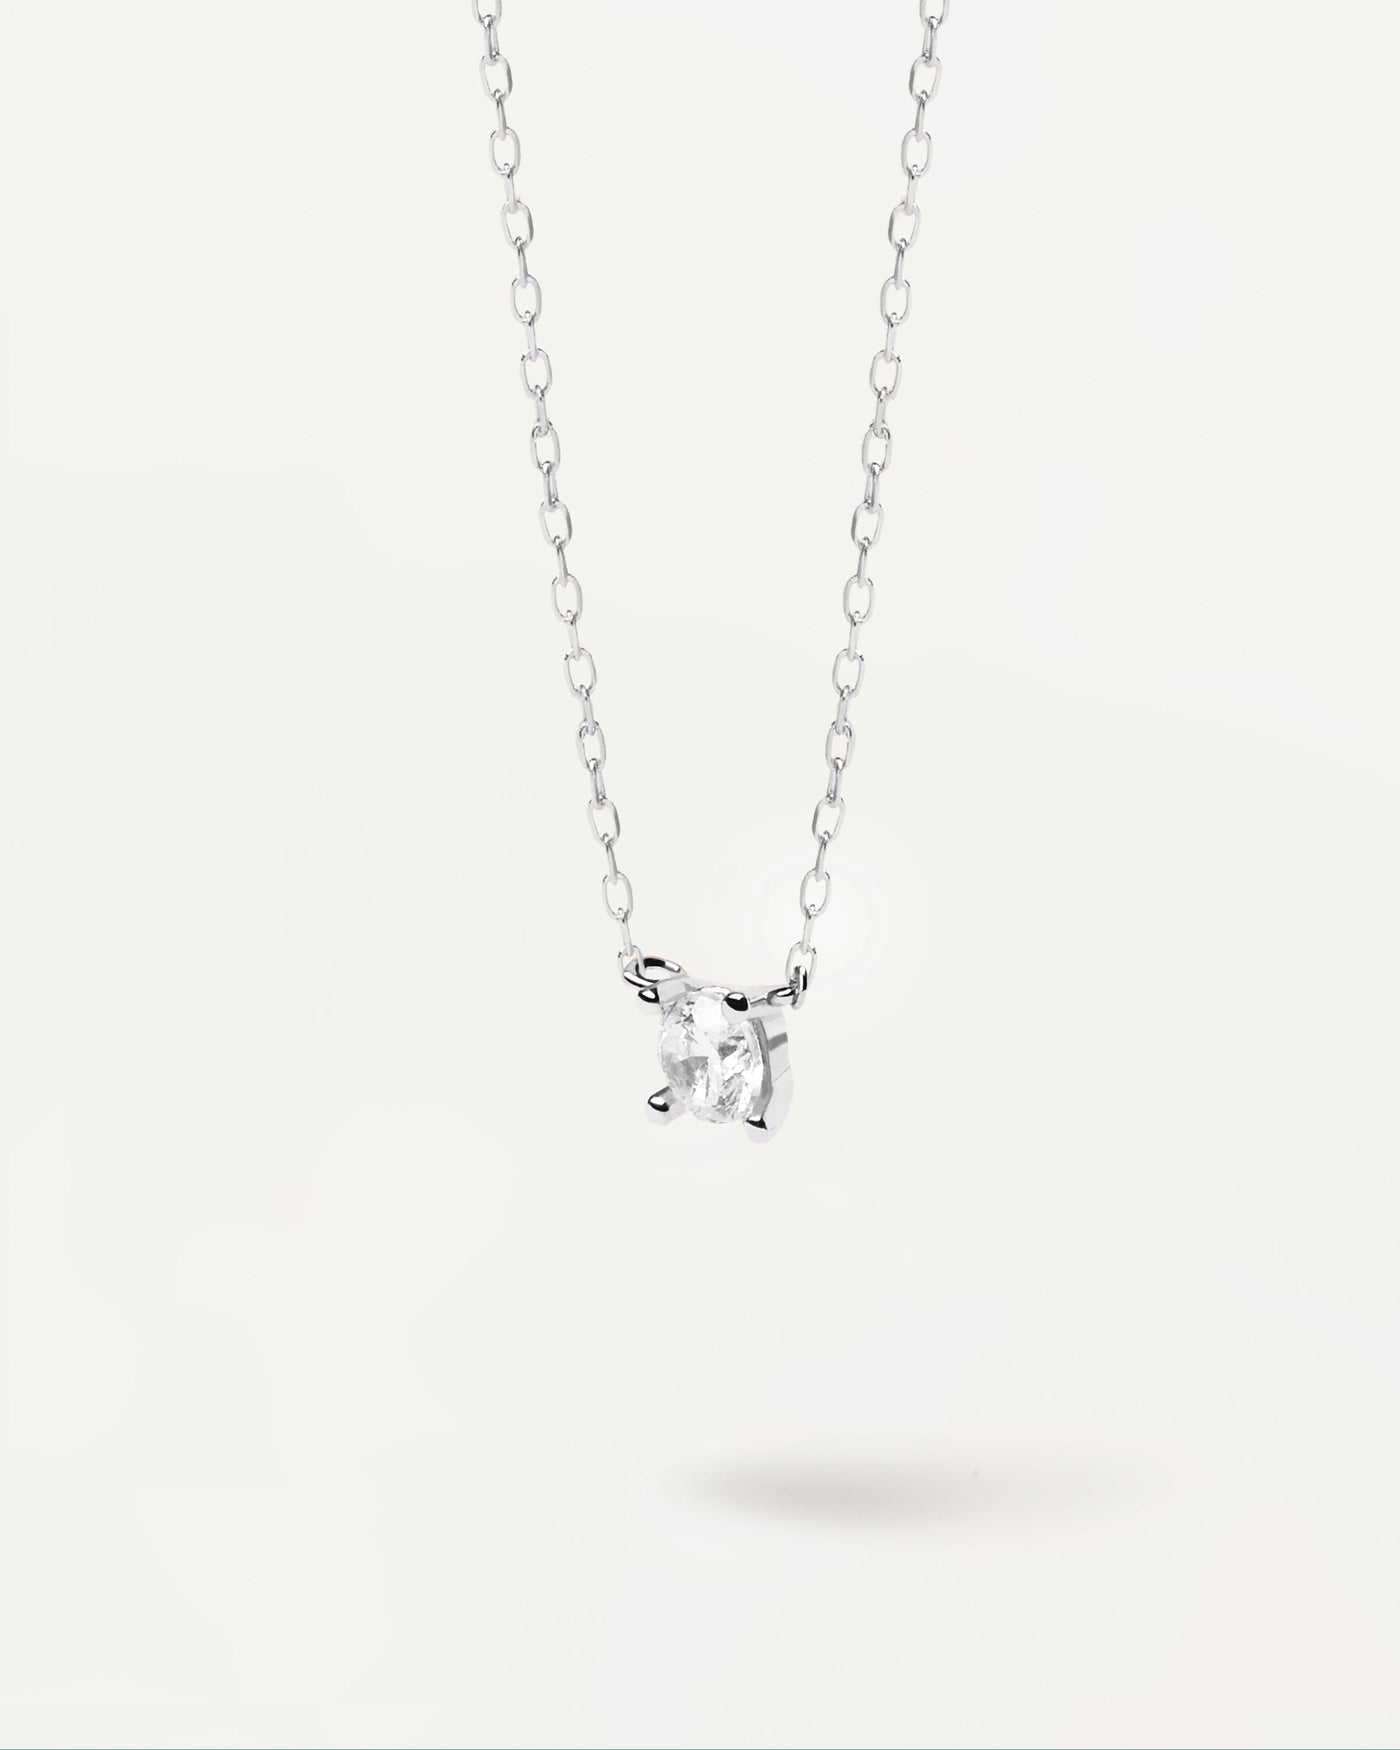 2023 Selection | Diamonds and White Gold Solitaire Mini Necklace. Solid white gold chain necklace with small round solitary diamond of 0.10 carats. Get the latest arrival from PDPAOLA. Place your order safely and get this Best Seller. Free Shipping.